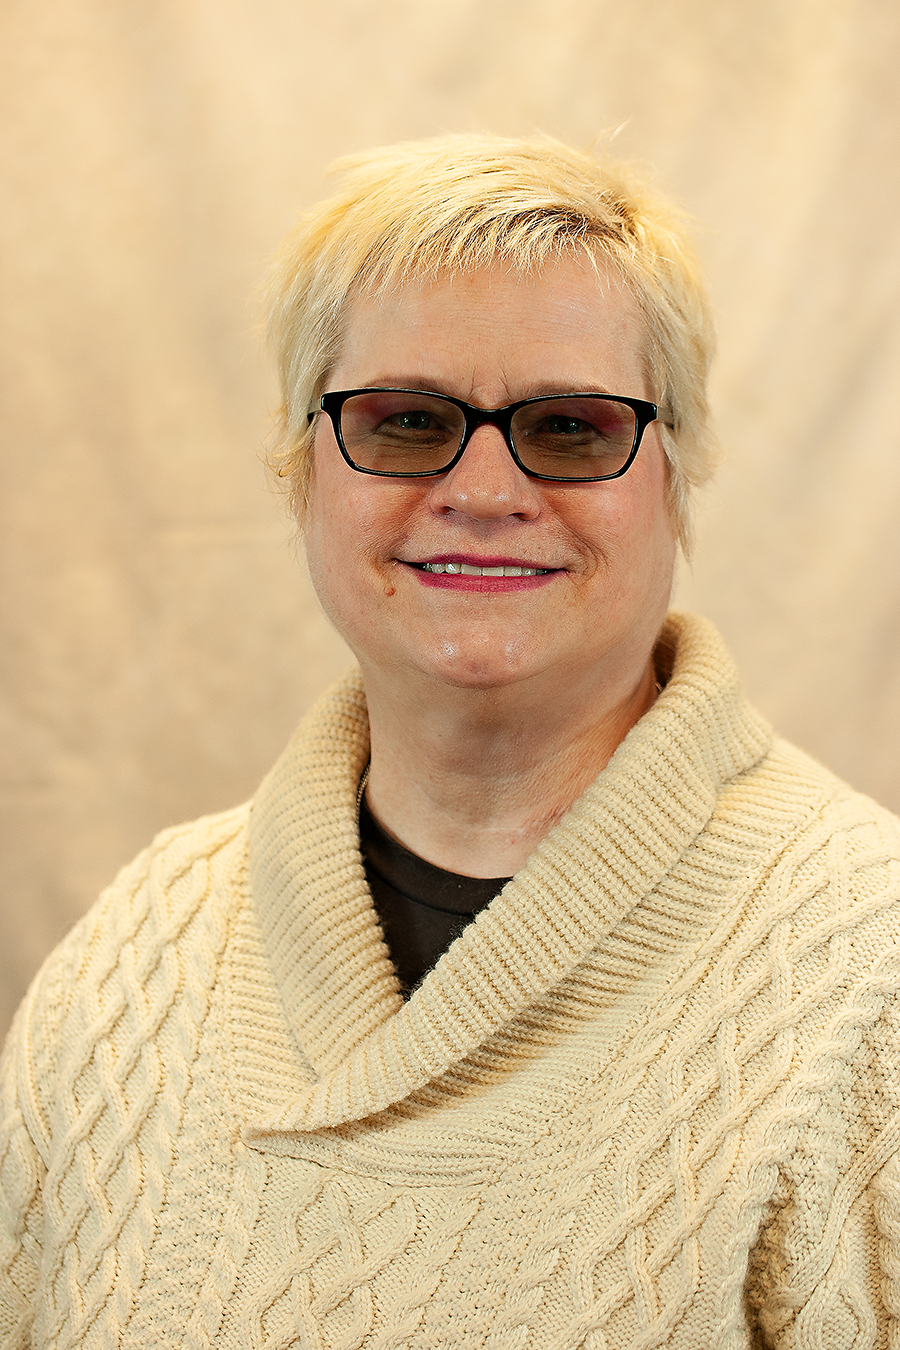 Middle-aged white woman with cropped blonde hair and dark glasses. She is wearing a fisherman's sweater. She is smiling.